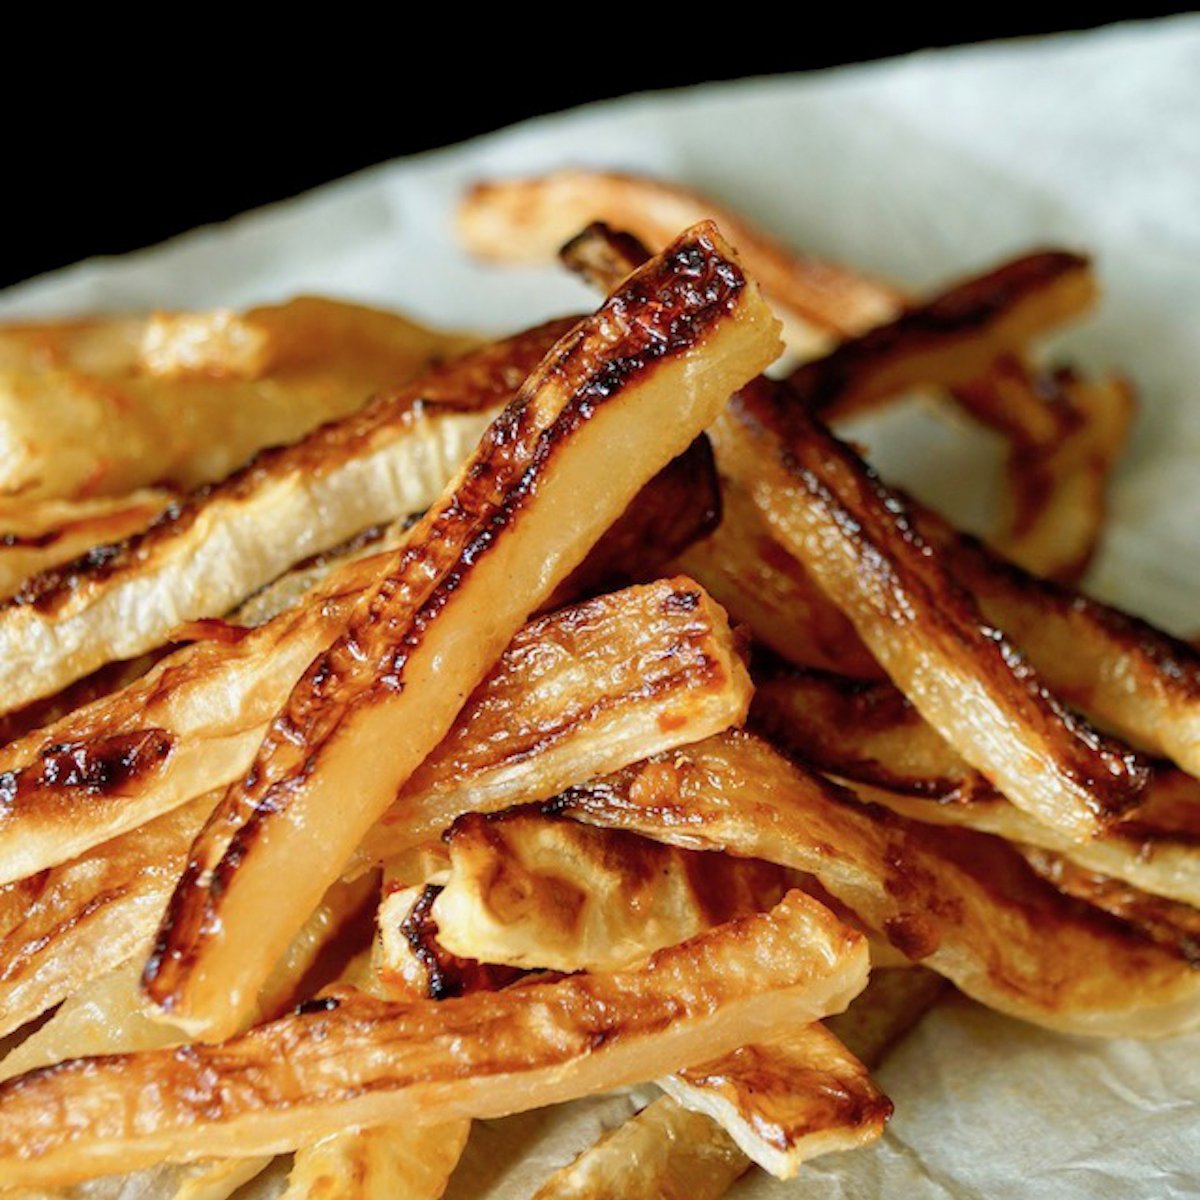 https://cookingontheweekends.com/wp-content/uploads/2019/01/Spicy-Roasted-Daikon-French-Fries-TEXT.jpg